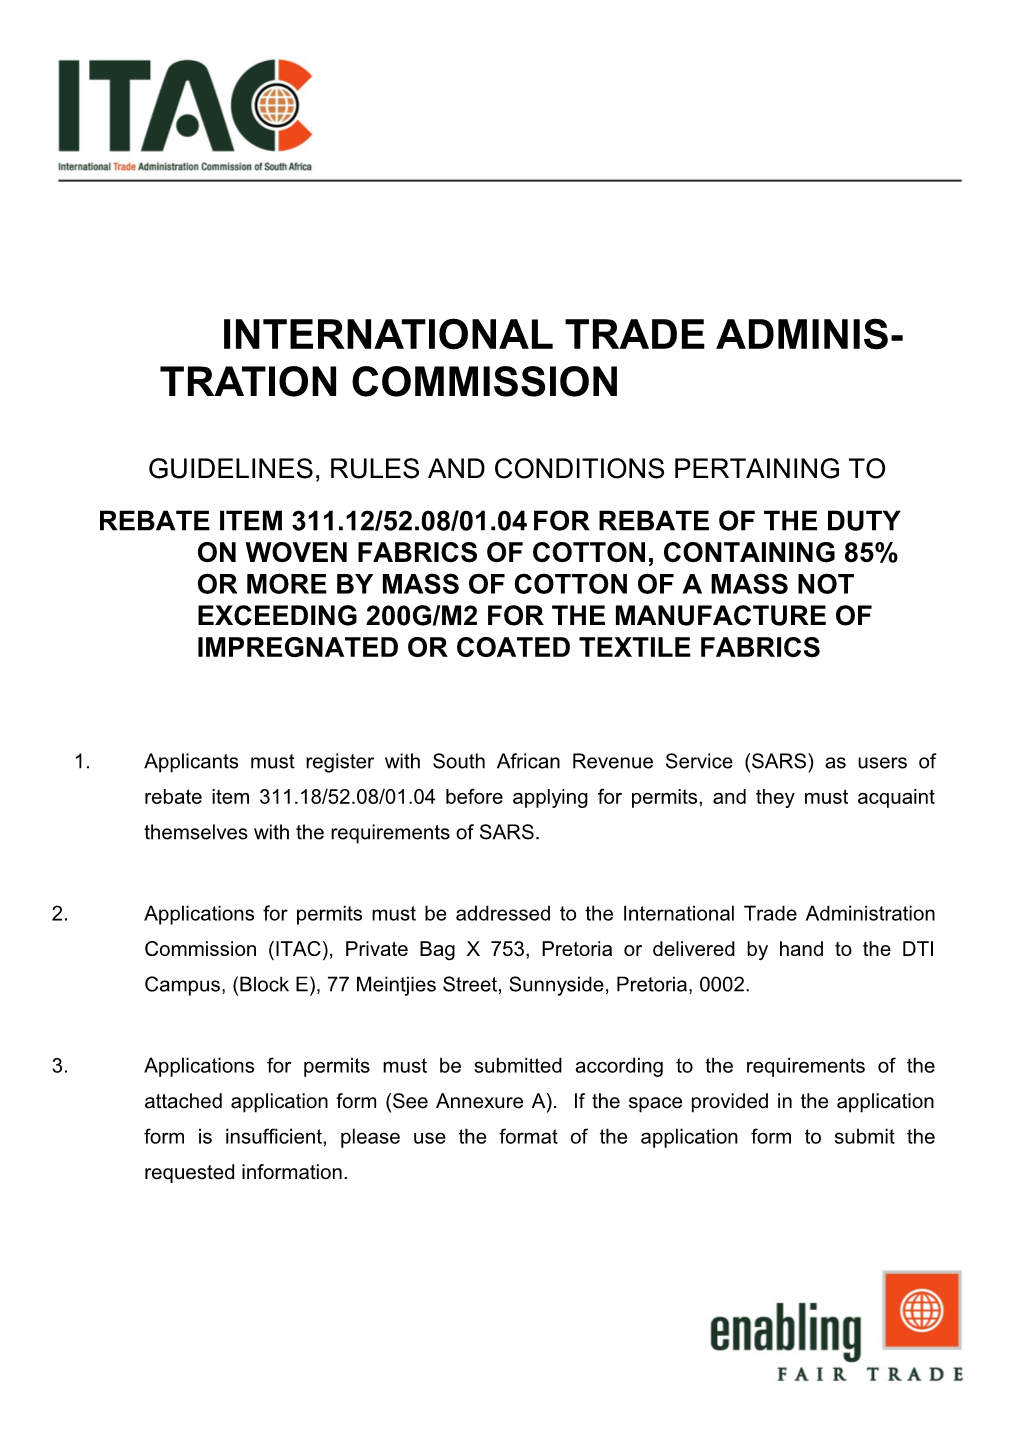 International Trade Administration Commission